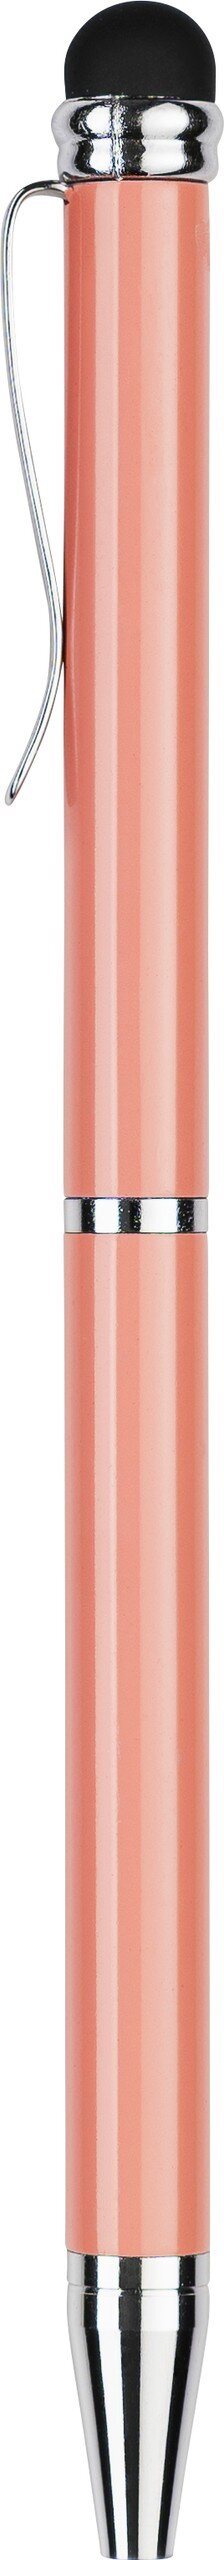 Kuglepen m/touch funktion pink